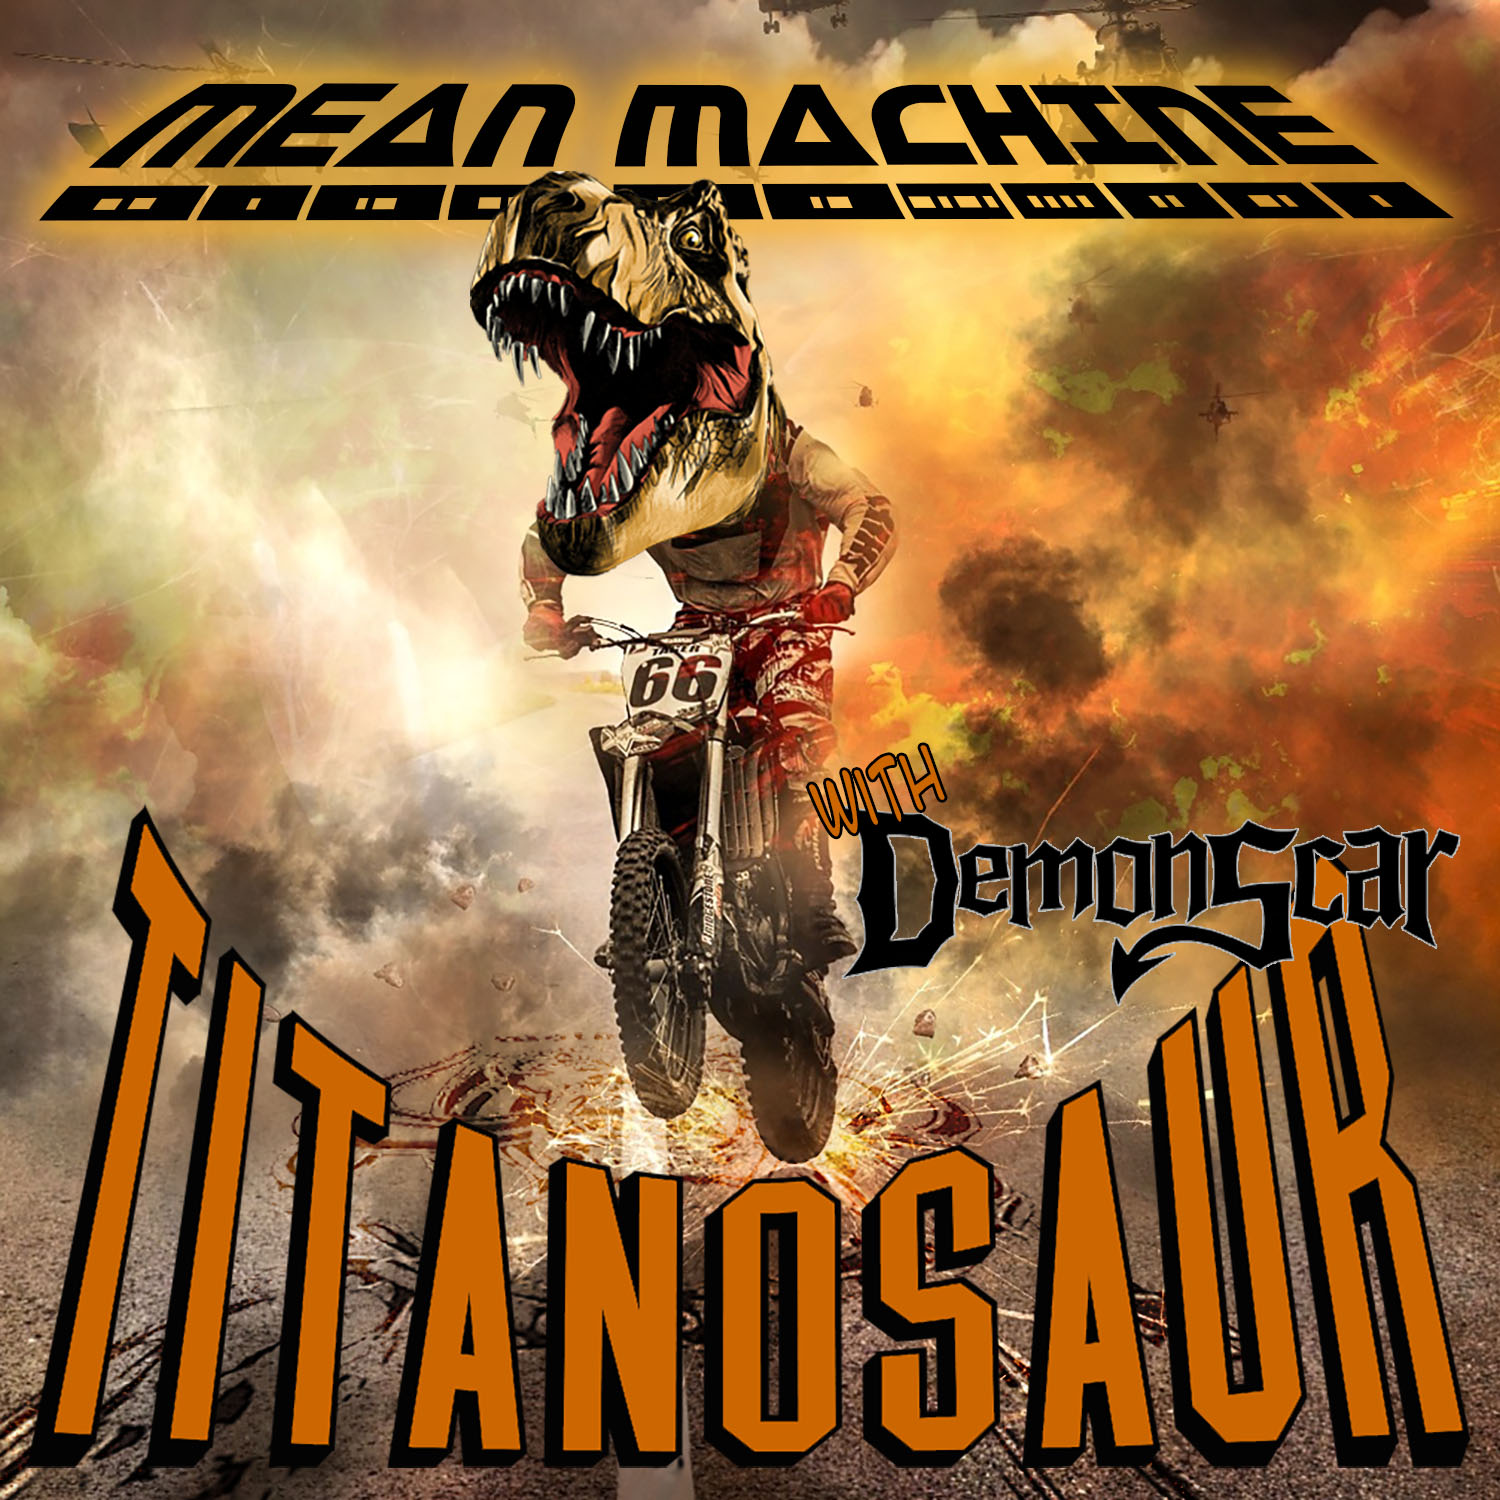 Cover artwork for "Mean Machine"